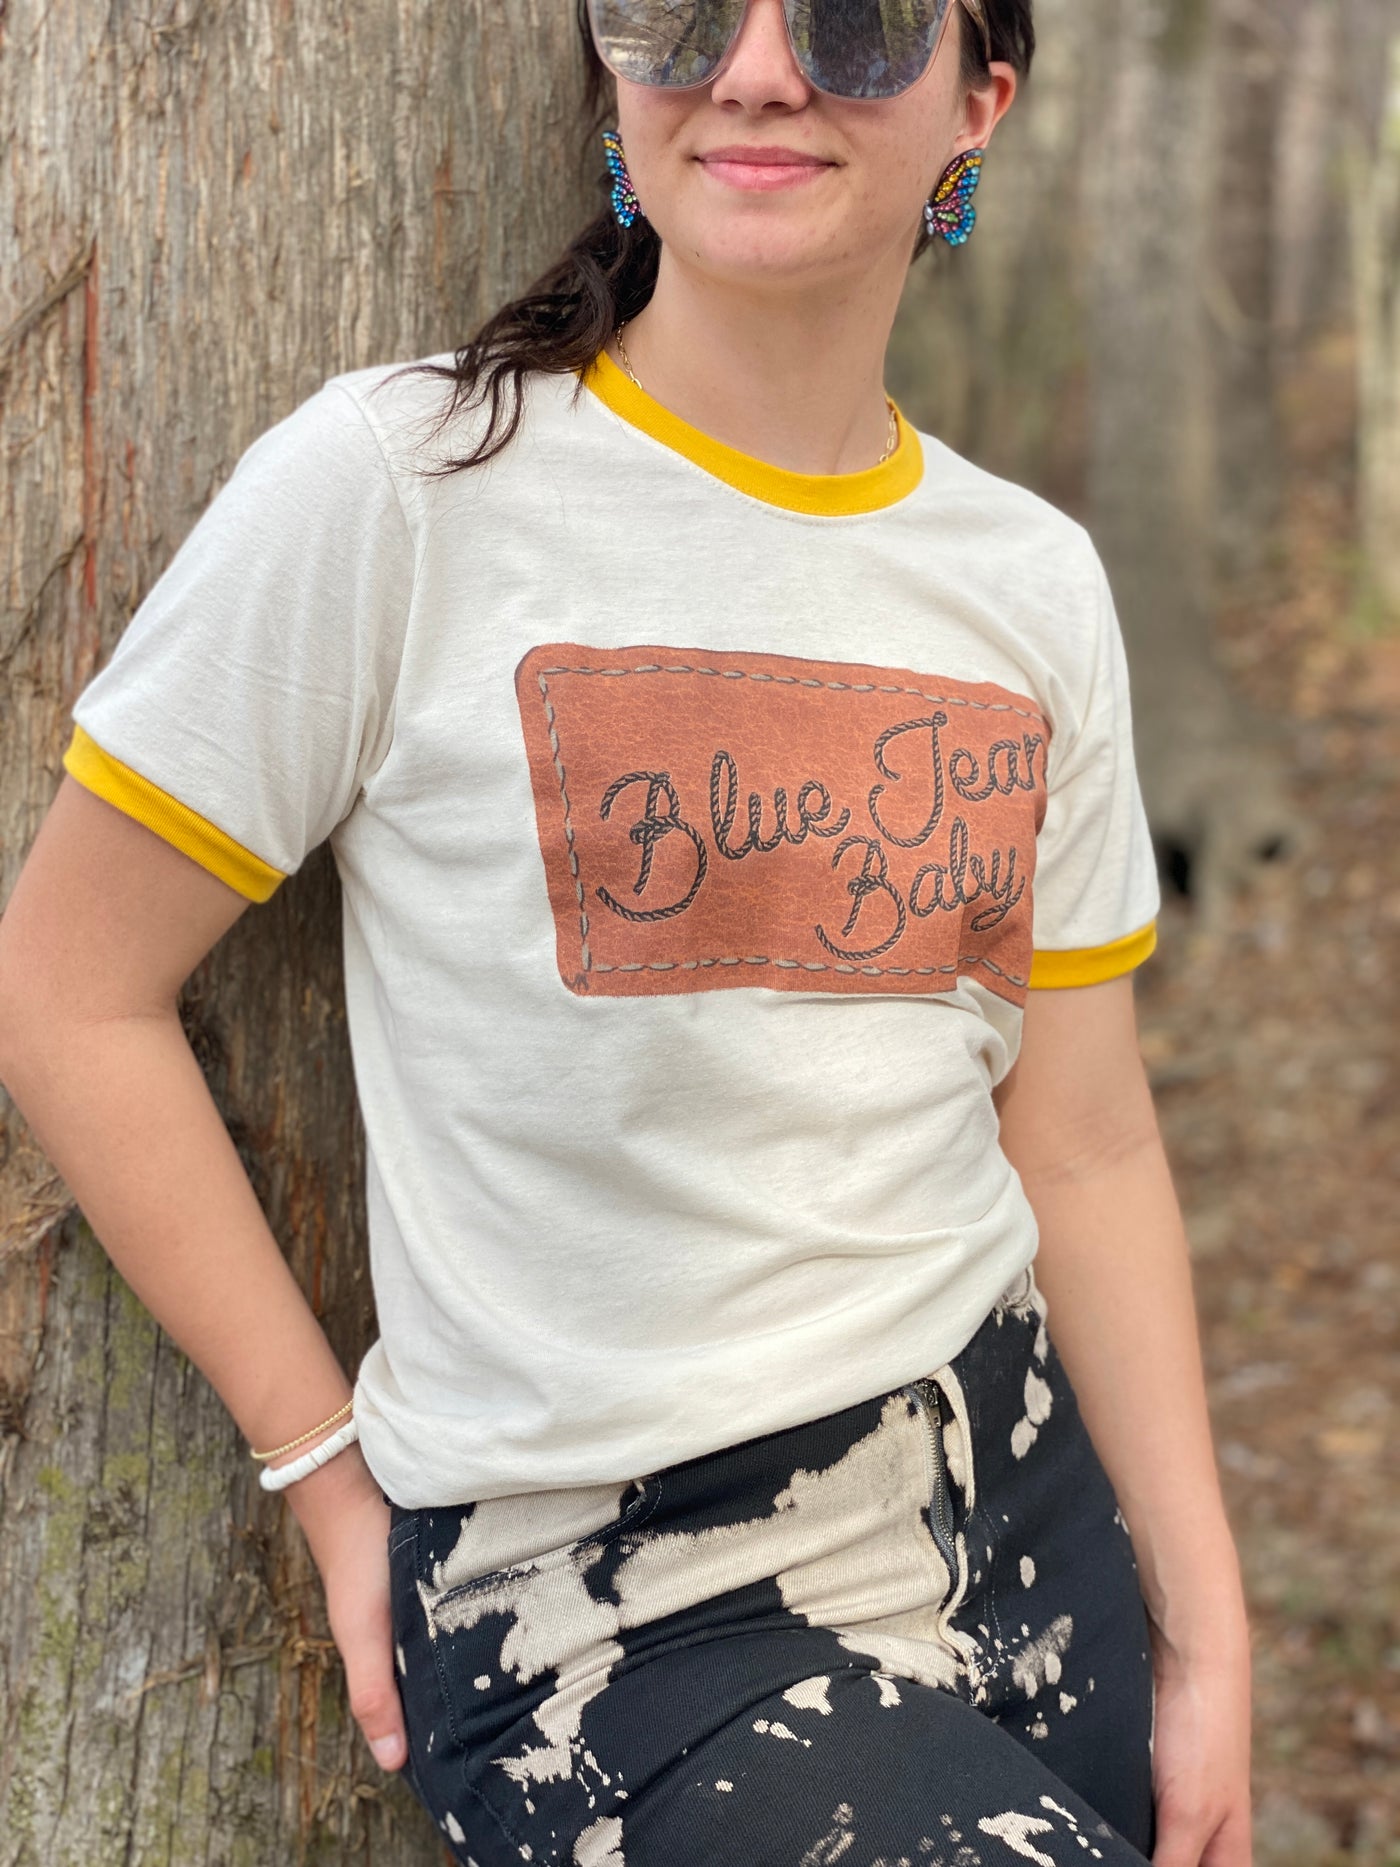 Brunette Model wearing a yellow and cream ringer tee and black and white bleach splatter pants. Tee has a graphic that looks like a leather patch sewn onto the shirt and the words Blue Jean Baby in rope font on the patch.